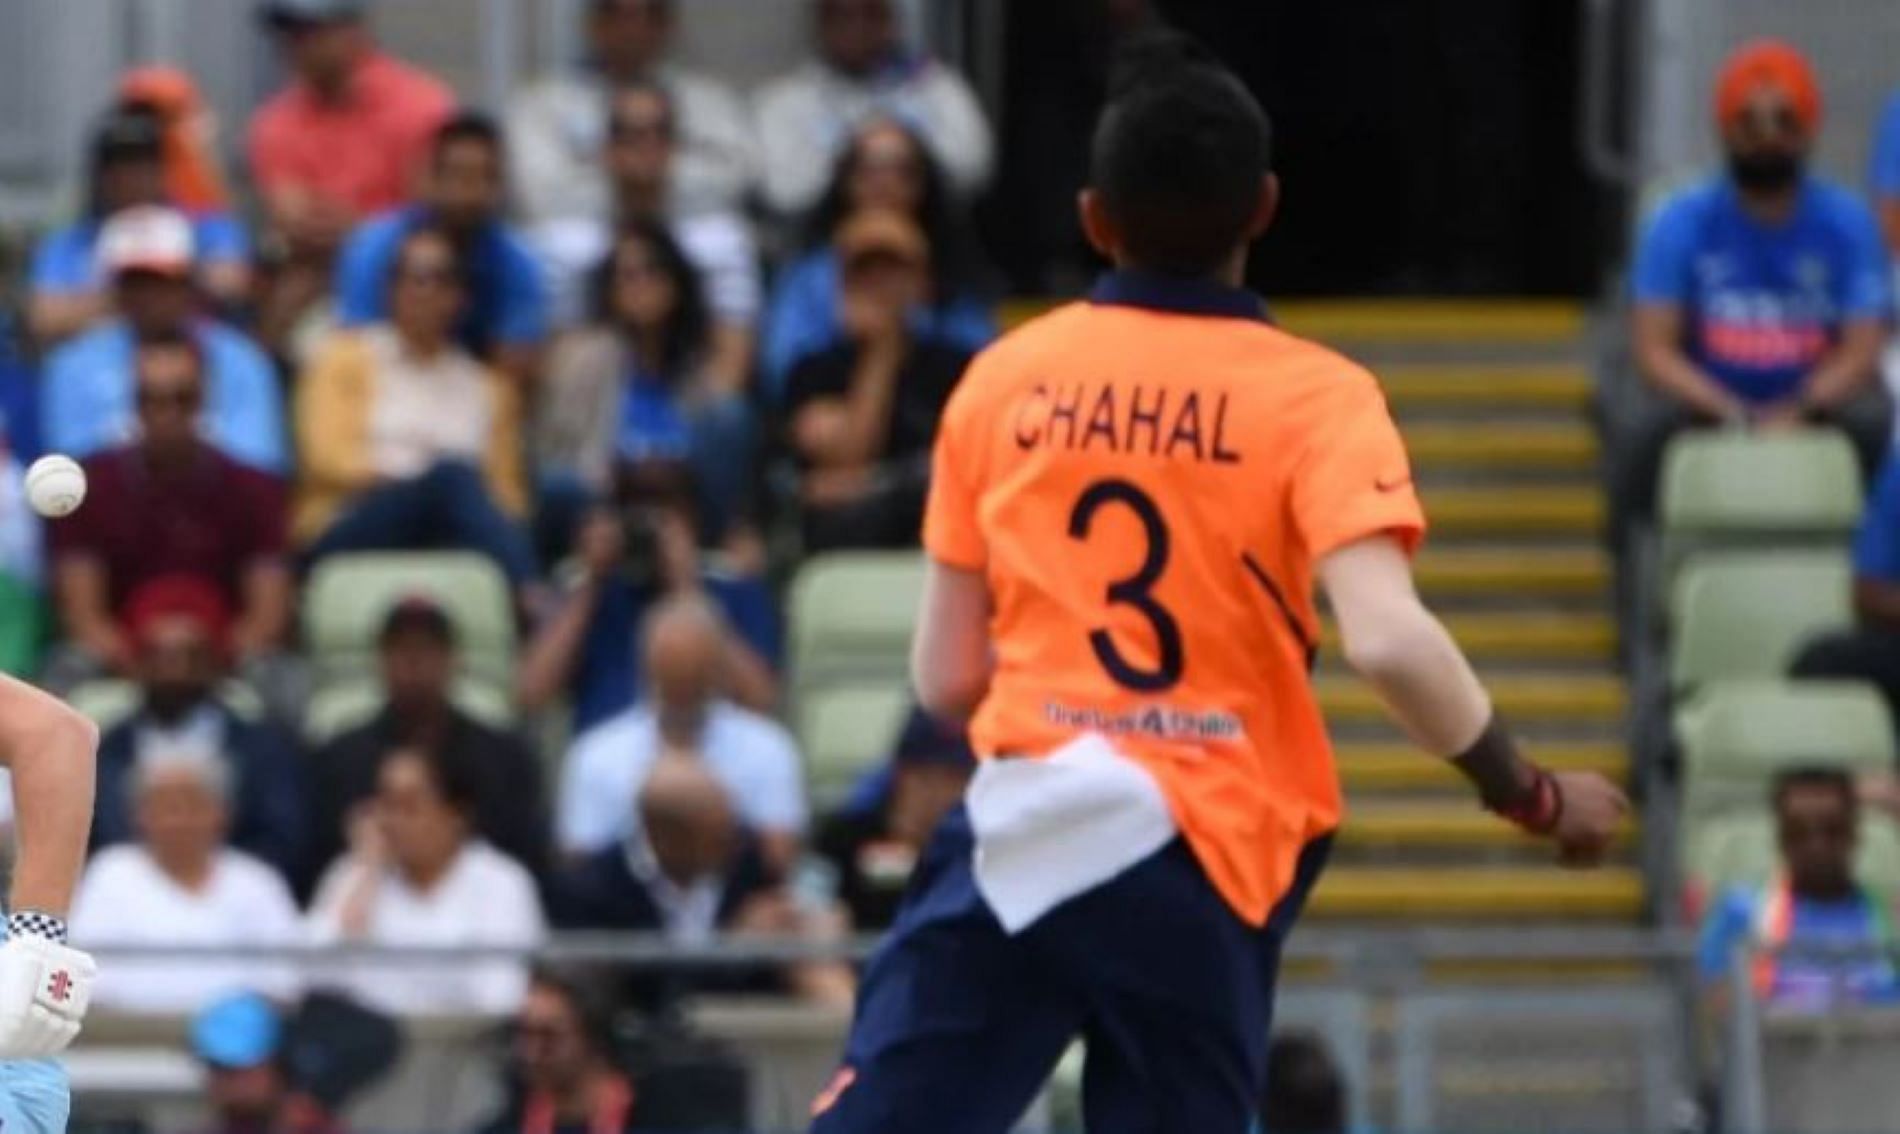 Chahal was in for harsh treatment against England.